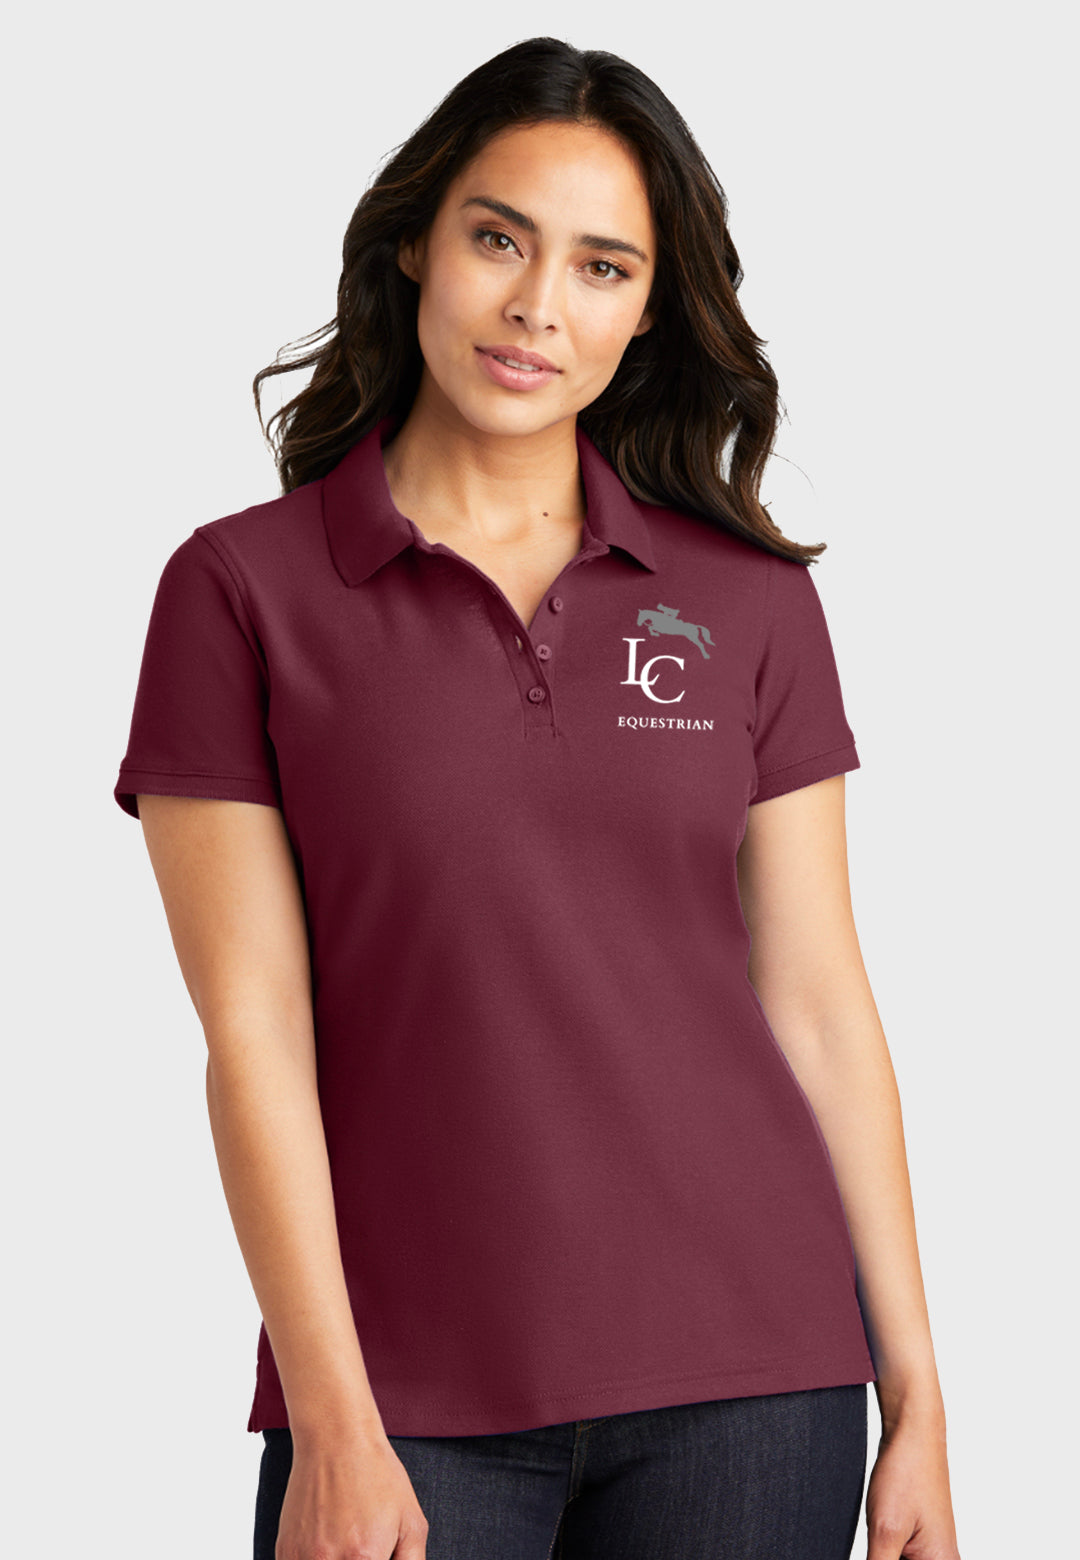 Loomis Chaffee equestrian Port Authority® Core Classic Pique Polo - Ladies + Mens